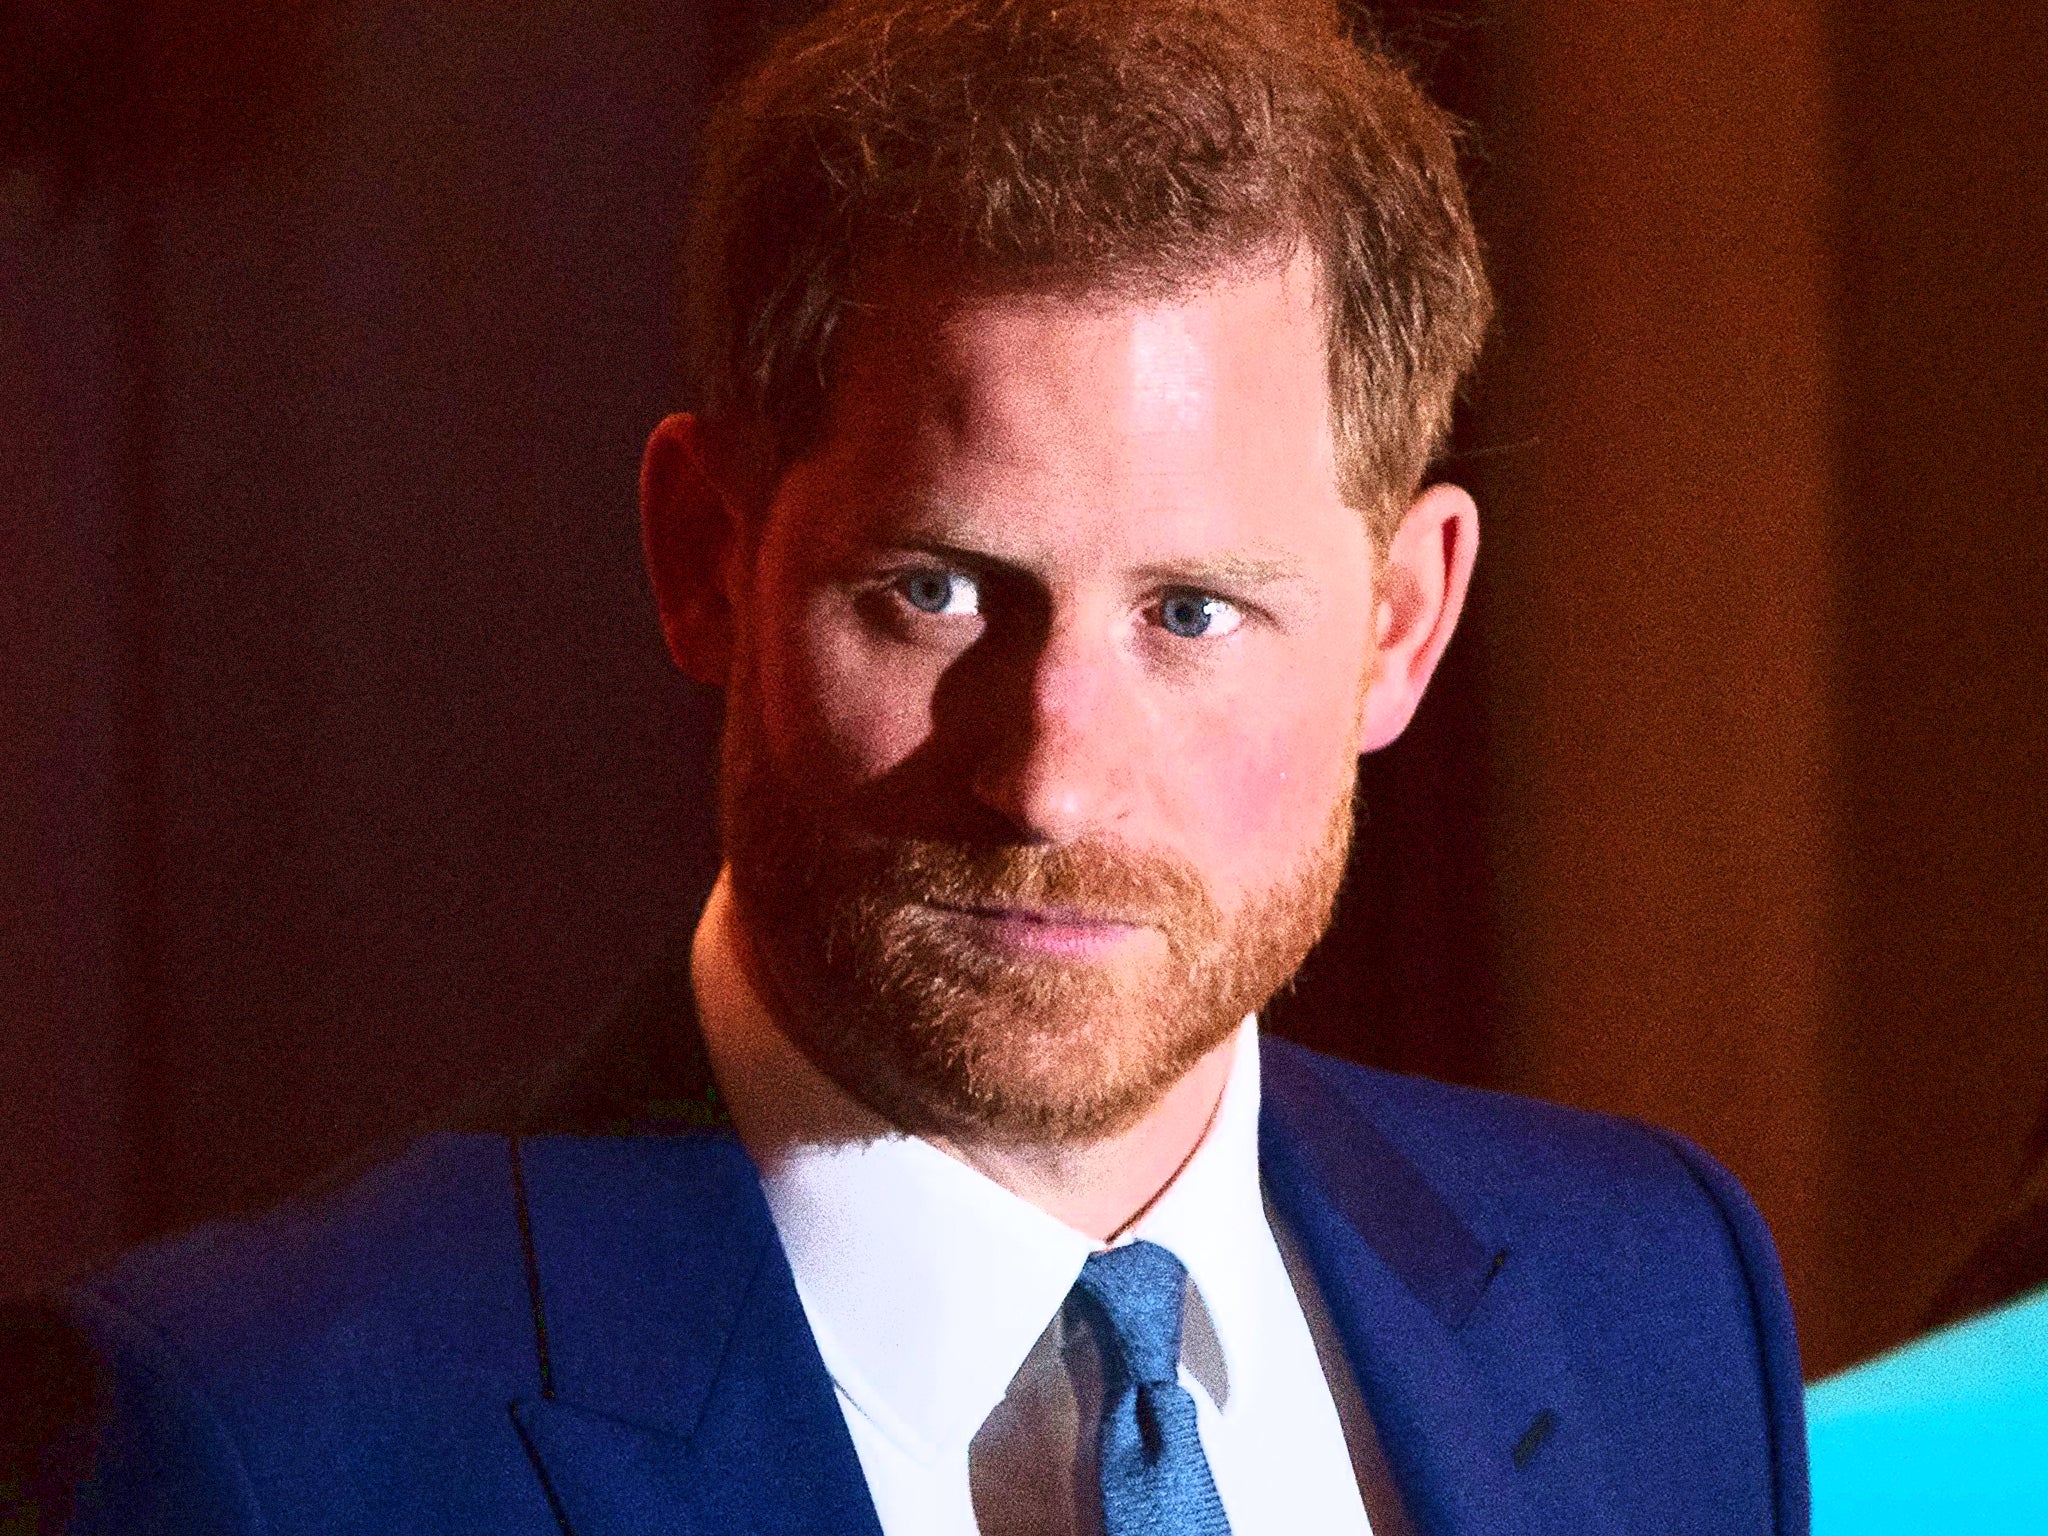 The Duke of Sussex has expressed eagerness to mend his family, while simultaneously publishing details of their altercations